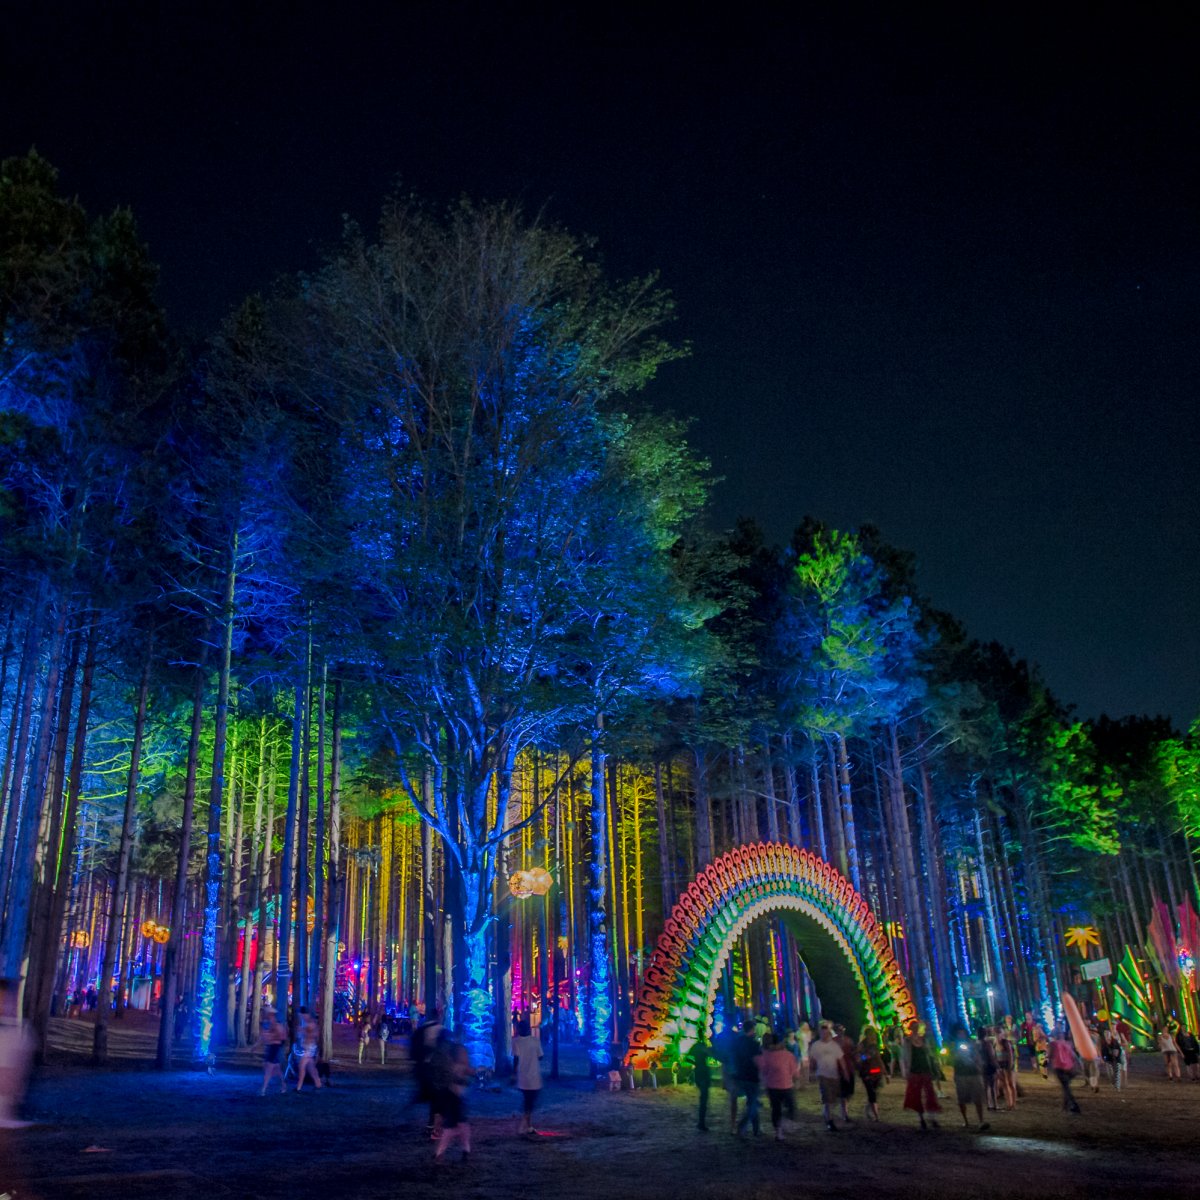 Image of an entrance in the shape of a rainbow and tall trees uplight in bright colors